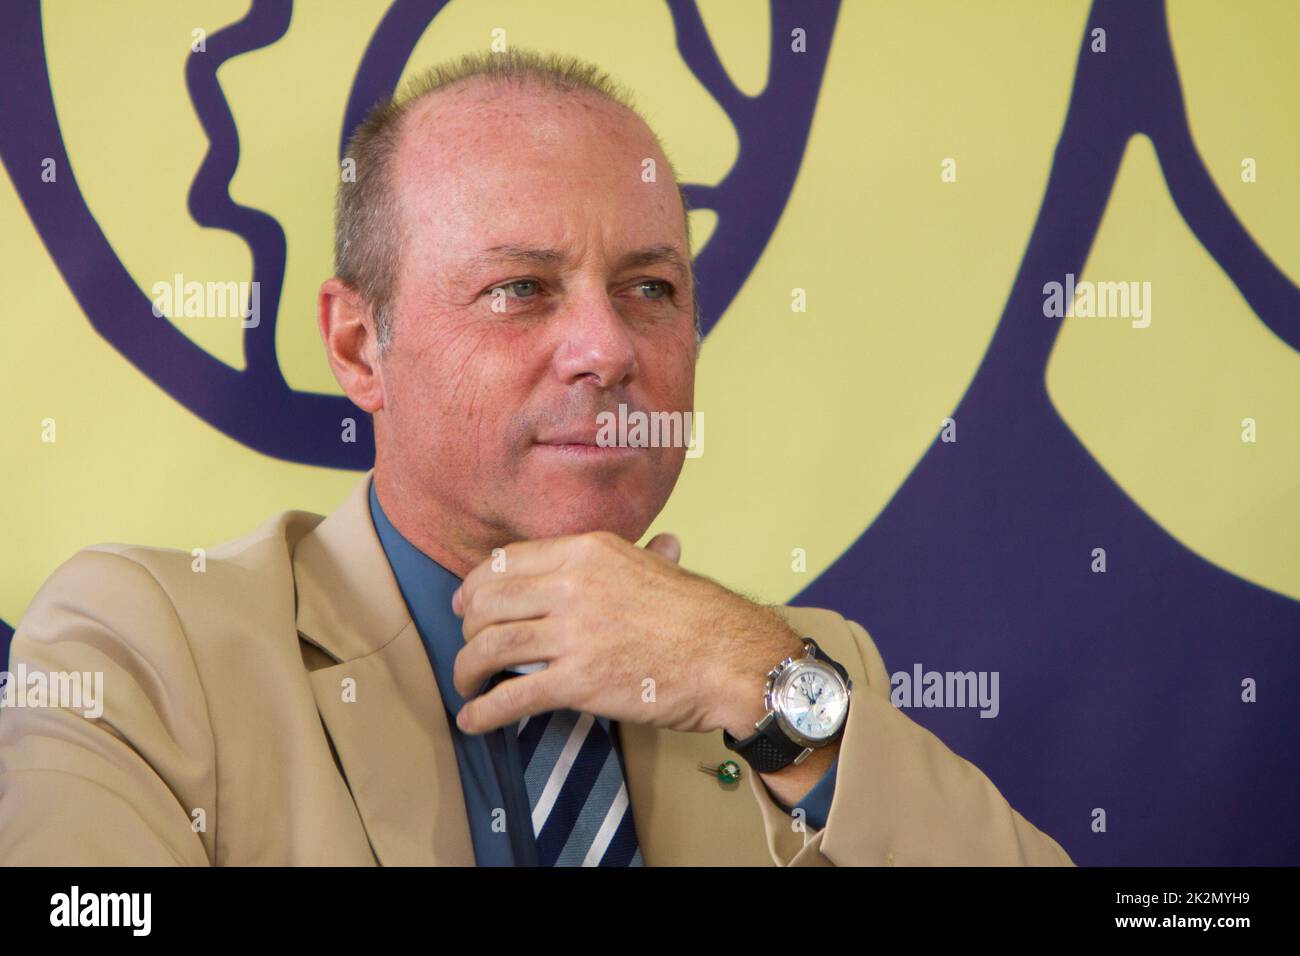 Torino, Italy. 22nd September 2022. Giuseppe Lavazza, vice President of Lavazza Group, attends a conference at 2022 Terra Madre Salone del Gusto event. Stock Photo